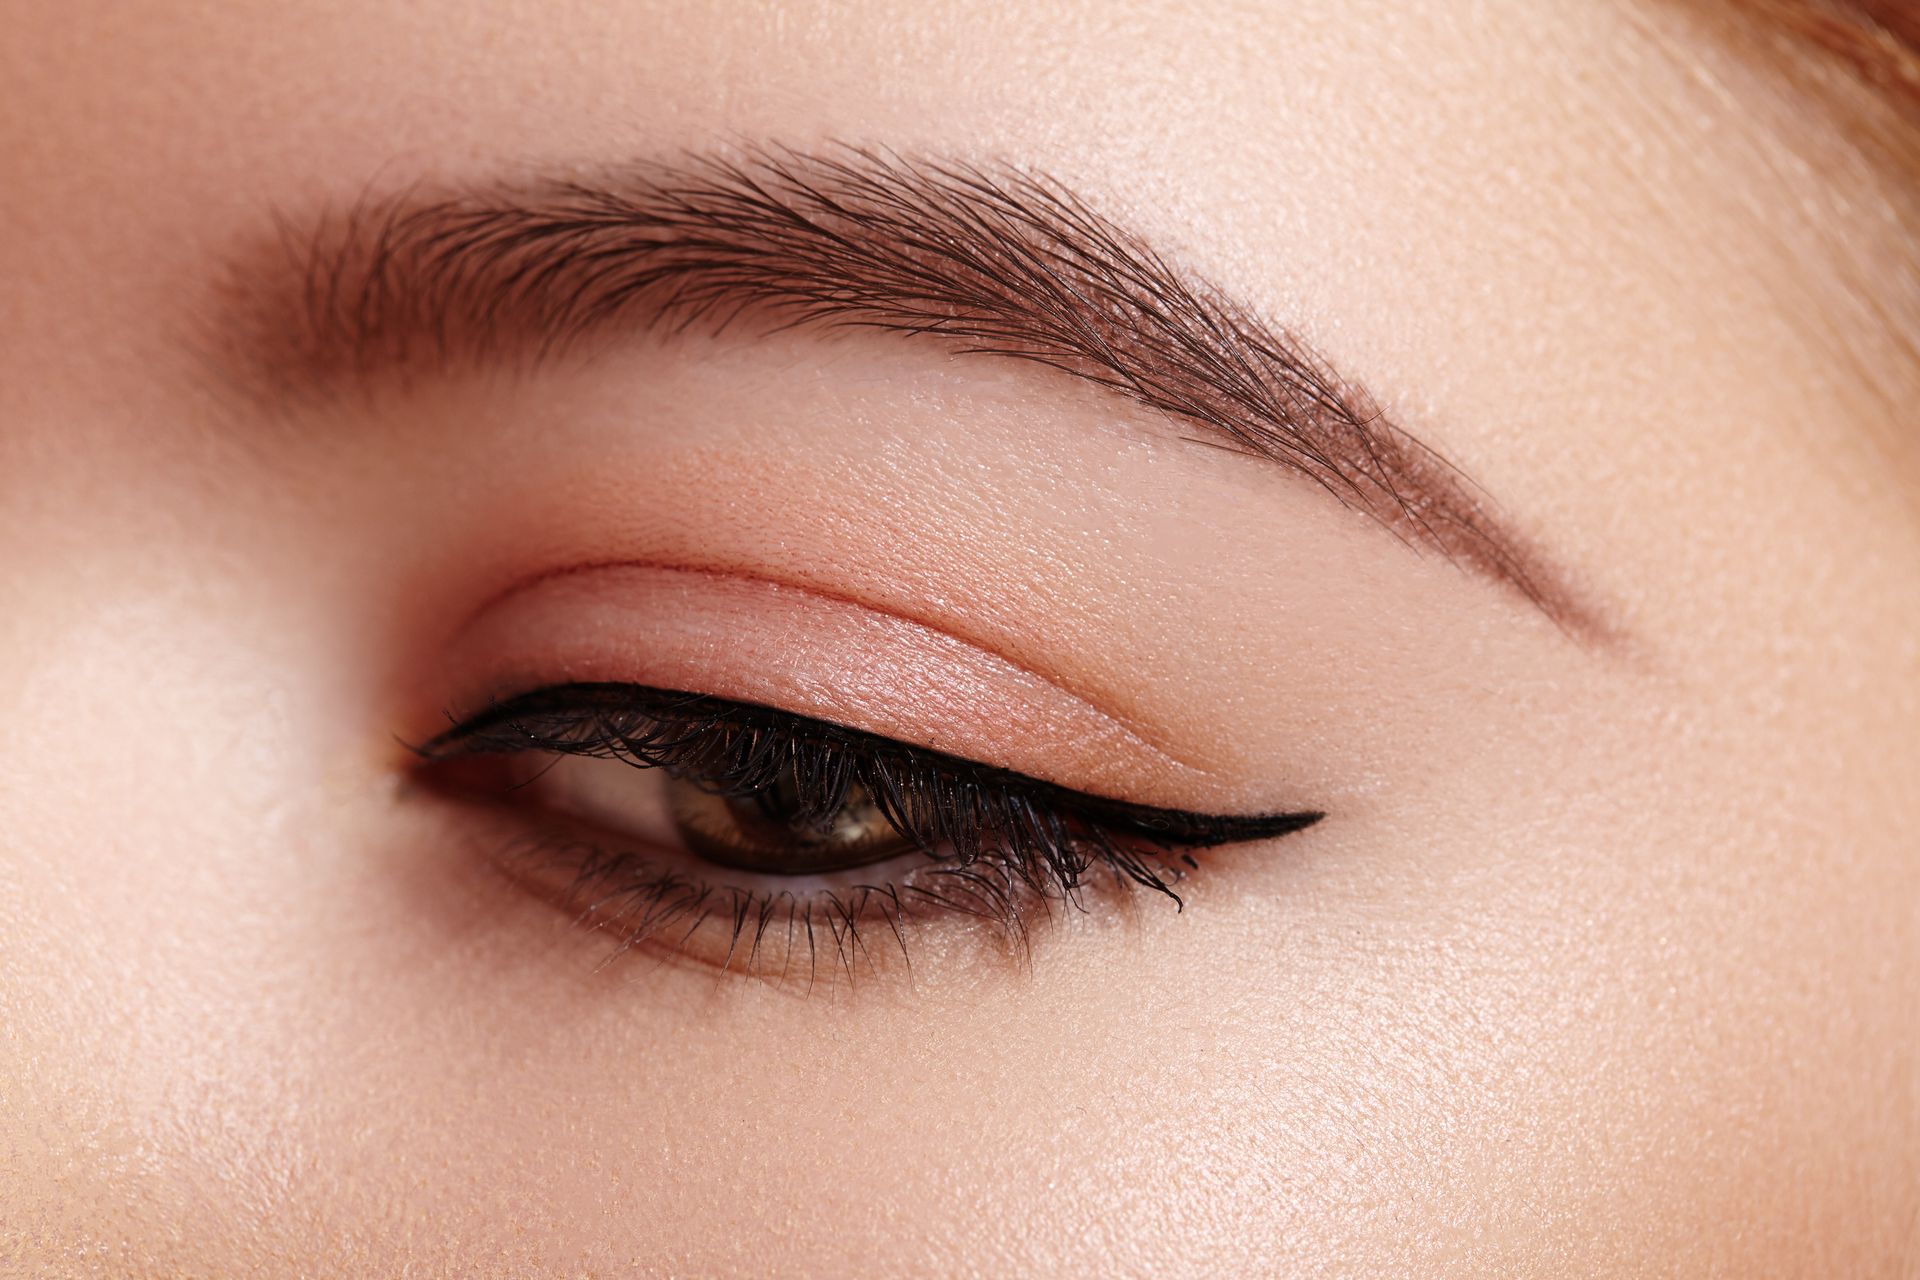 A close up of a woman 's eye with eyeliner.